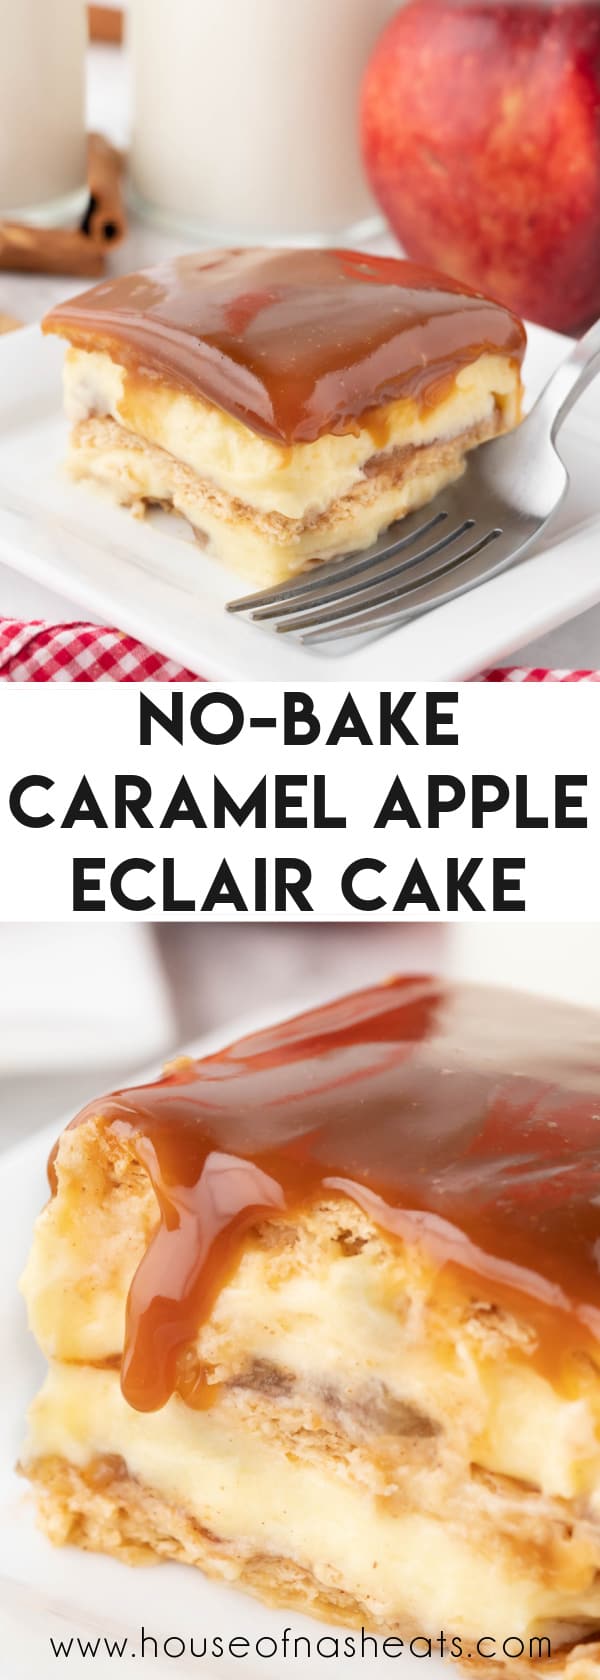 A collage of images of caramel apple eclair cake with text overlay.